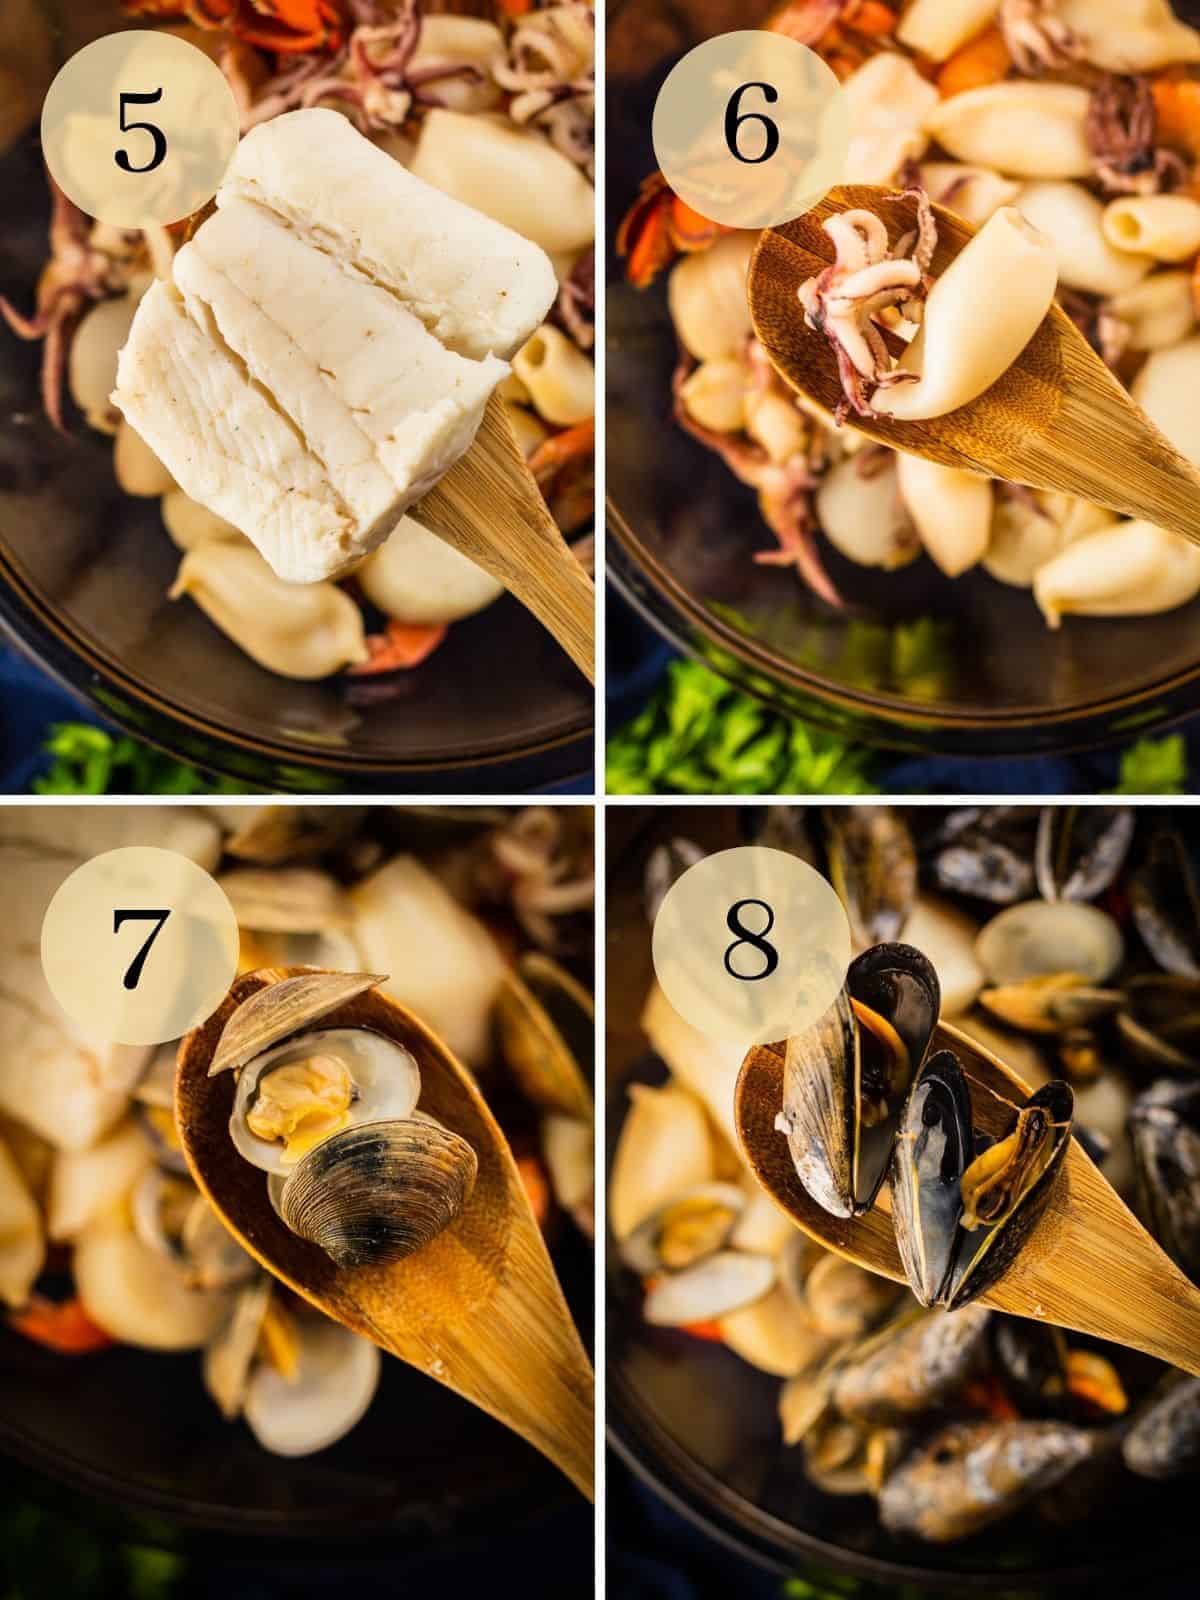 cooked halibut filet, cooked calamari, cooked clam and cooked mussel on a wooden spoon